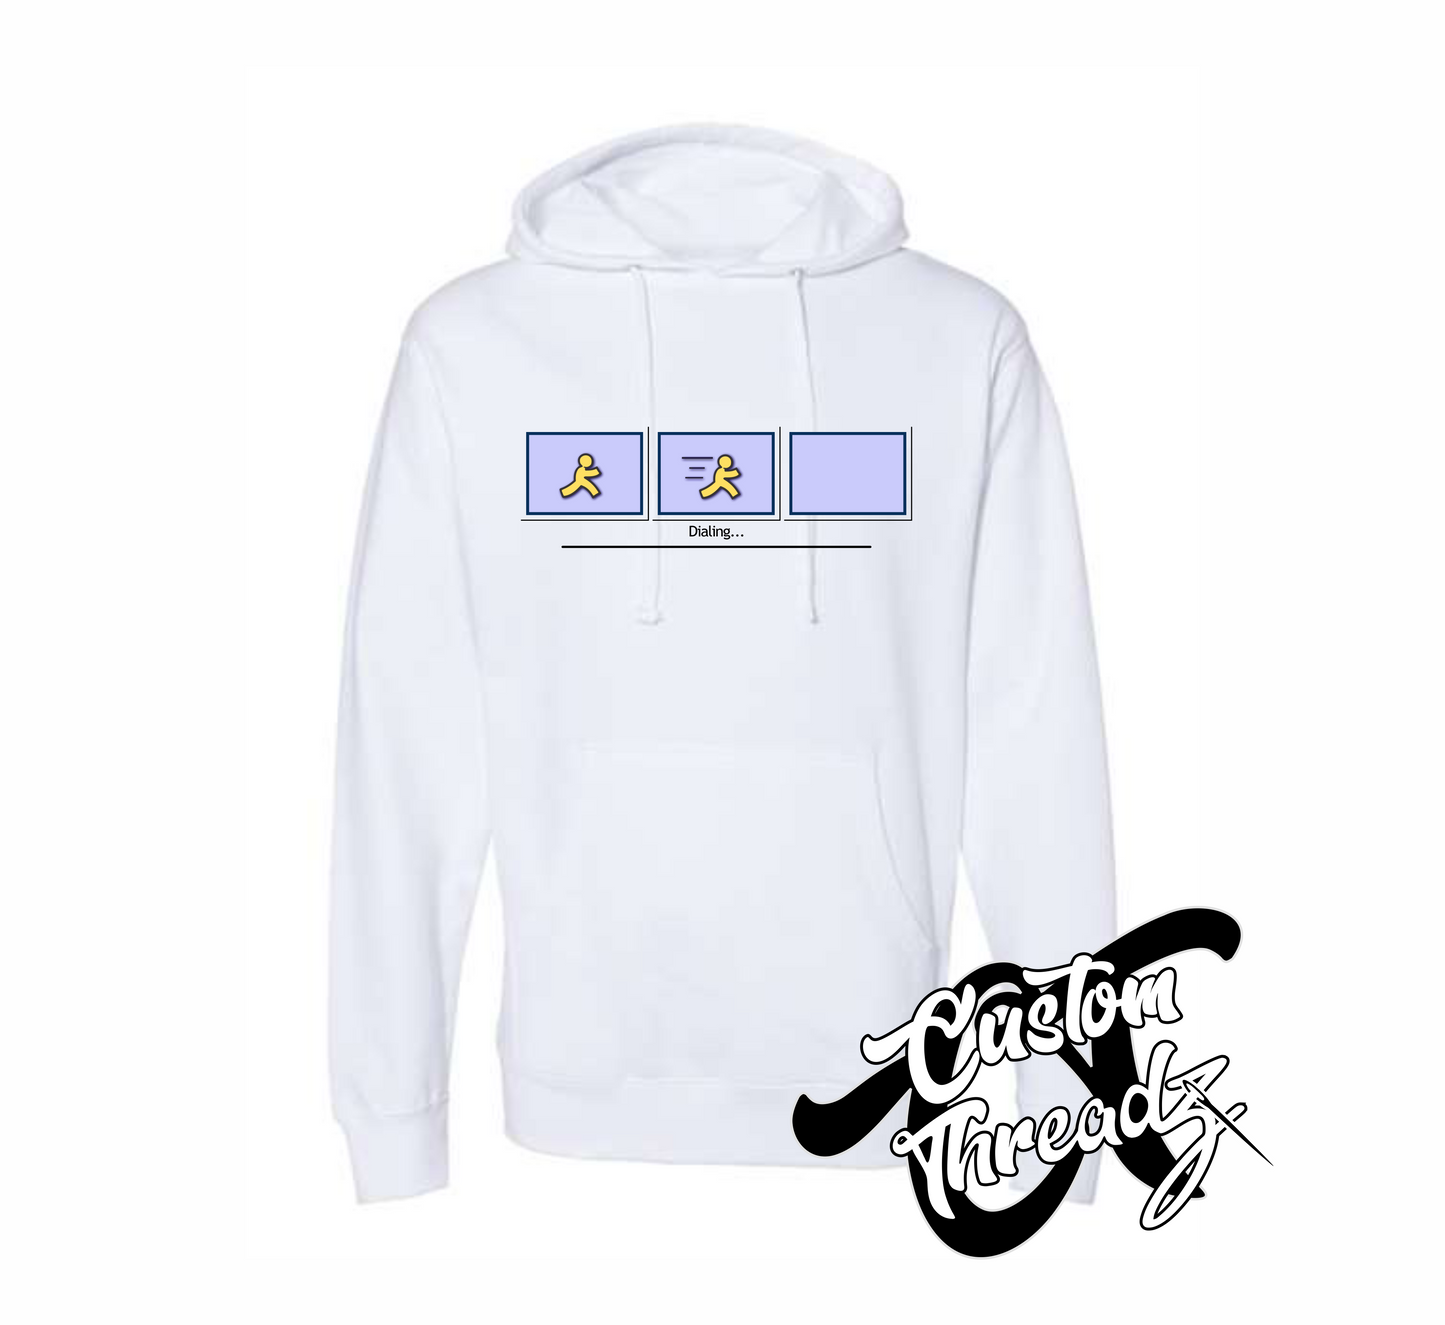 white hoodie with AOL dial up DTG printed design